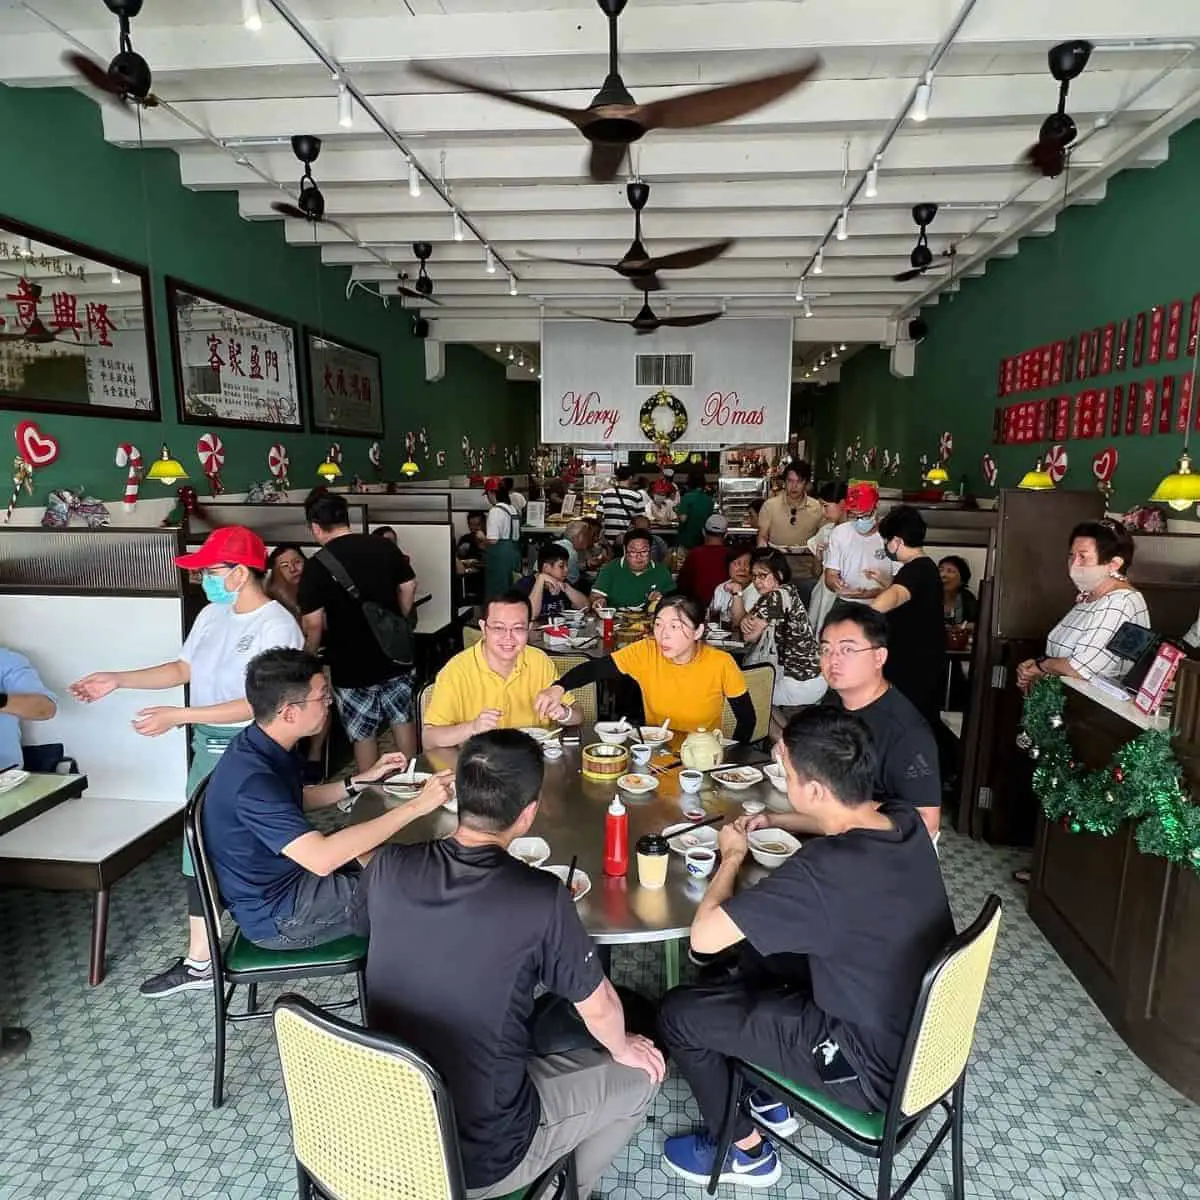 Yong Pin restaurant filled with local and tourist diners with Chinese signage in the walls